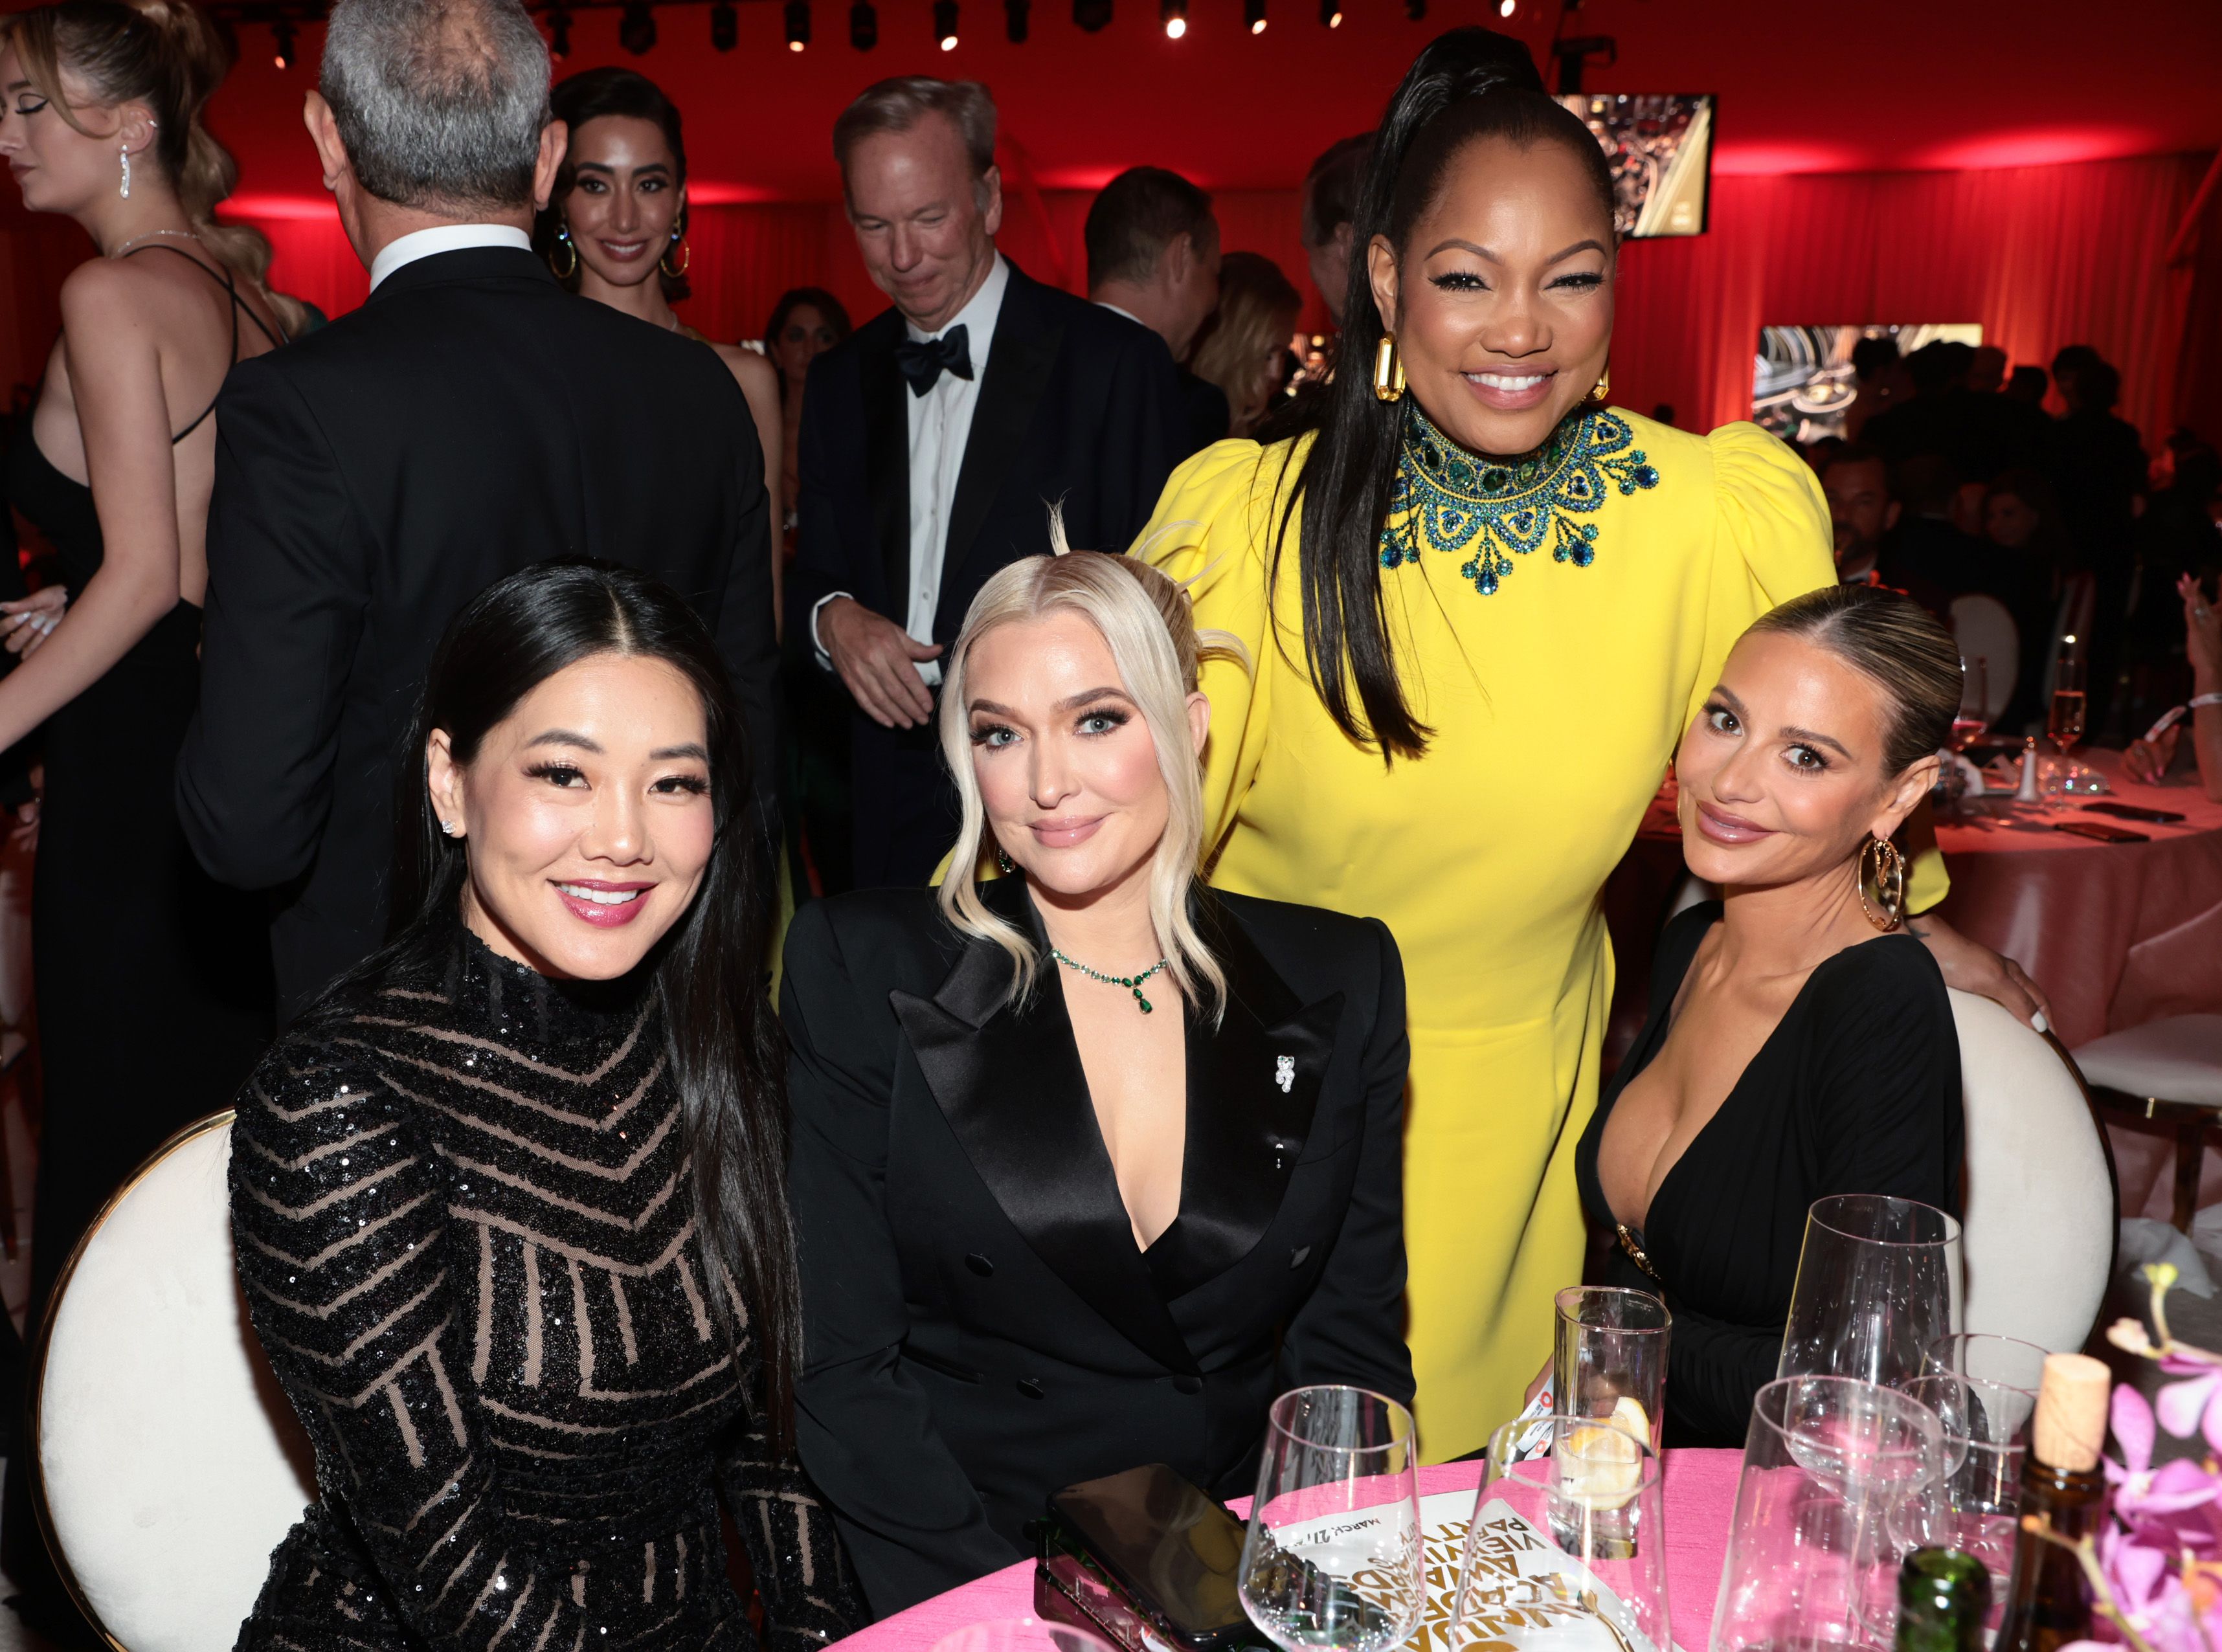 Why Are RHOBH Stars Erika Jayne And Garcelle Beauvais Fighting?